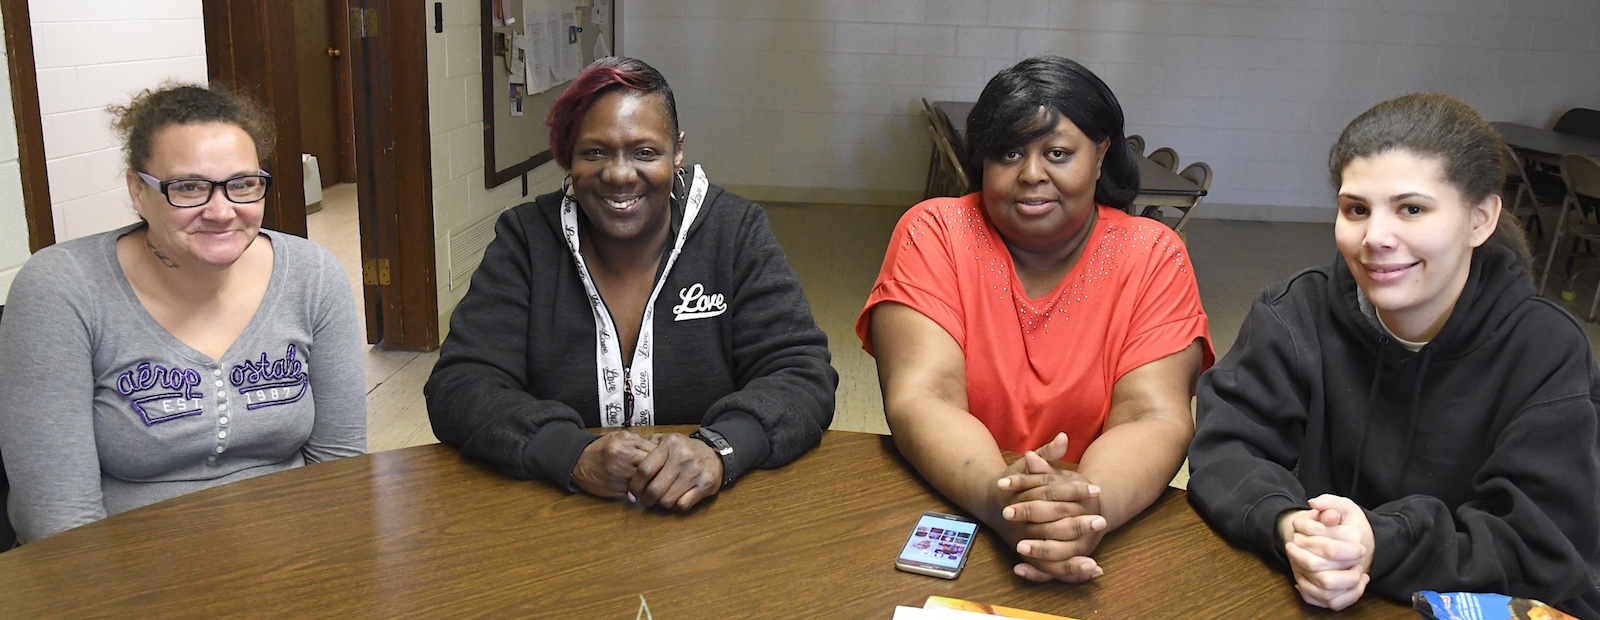 Co-op members, from left, Lori Squires, Teresa Gaines, Willie Crockett, and Sabrina Bottom.